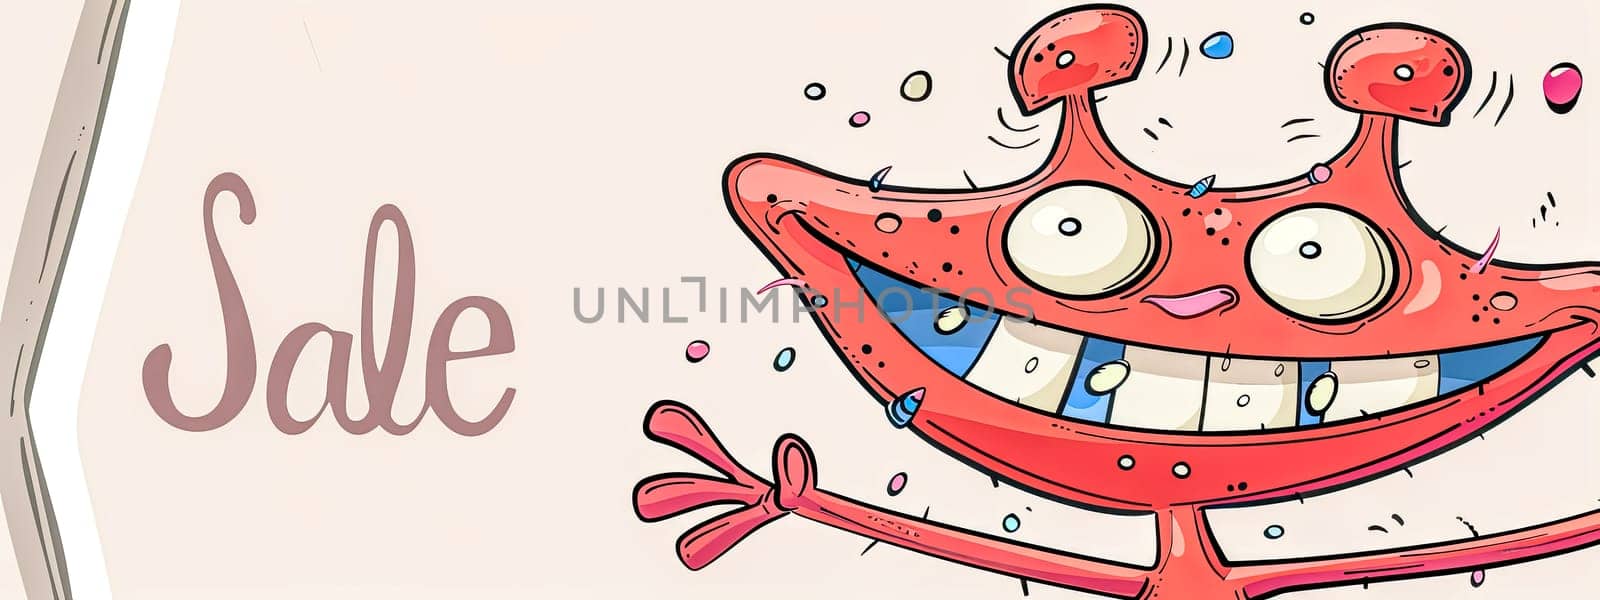 Cheerful cartoon crab announcing sale banner by Edophoto